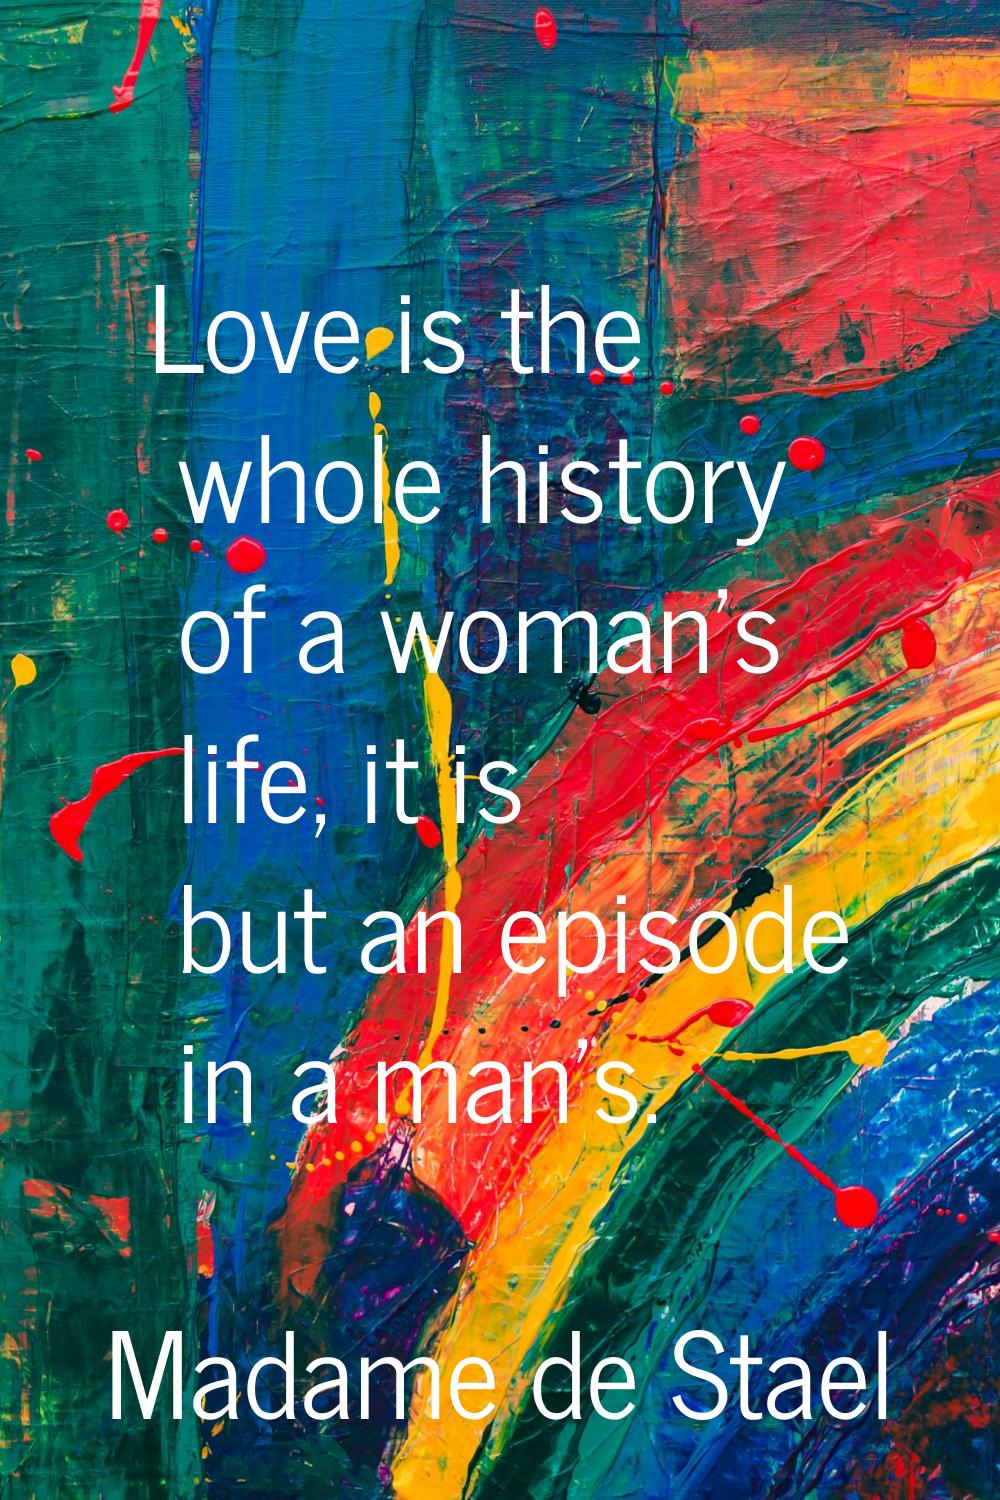 Love is the whole history of a woman's life, it is but an episode in a man's.